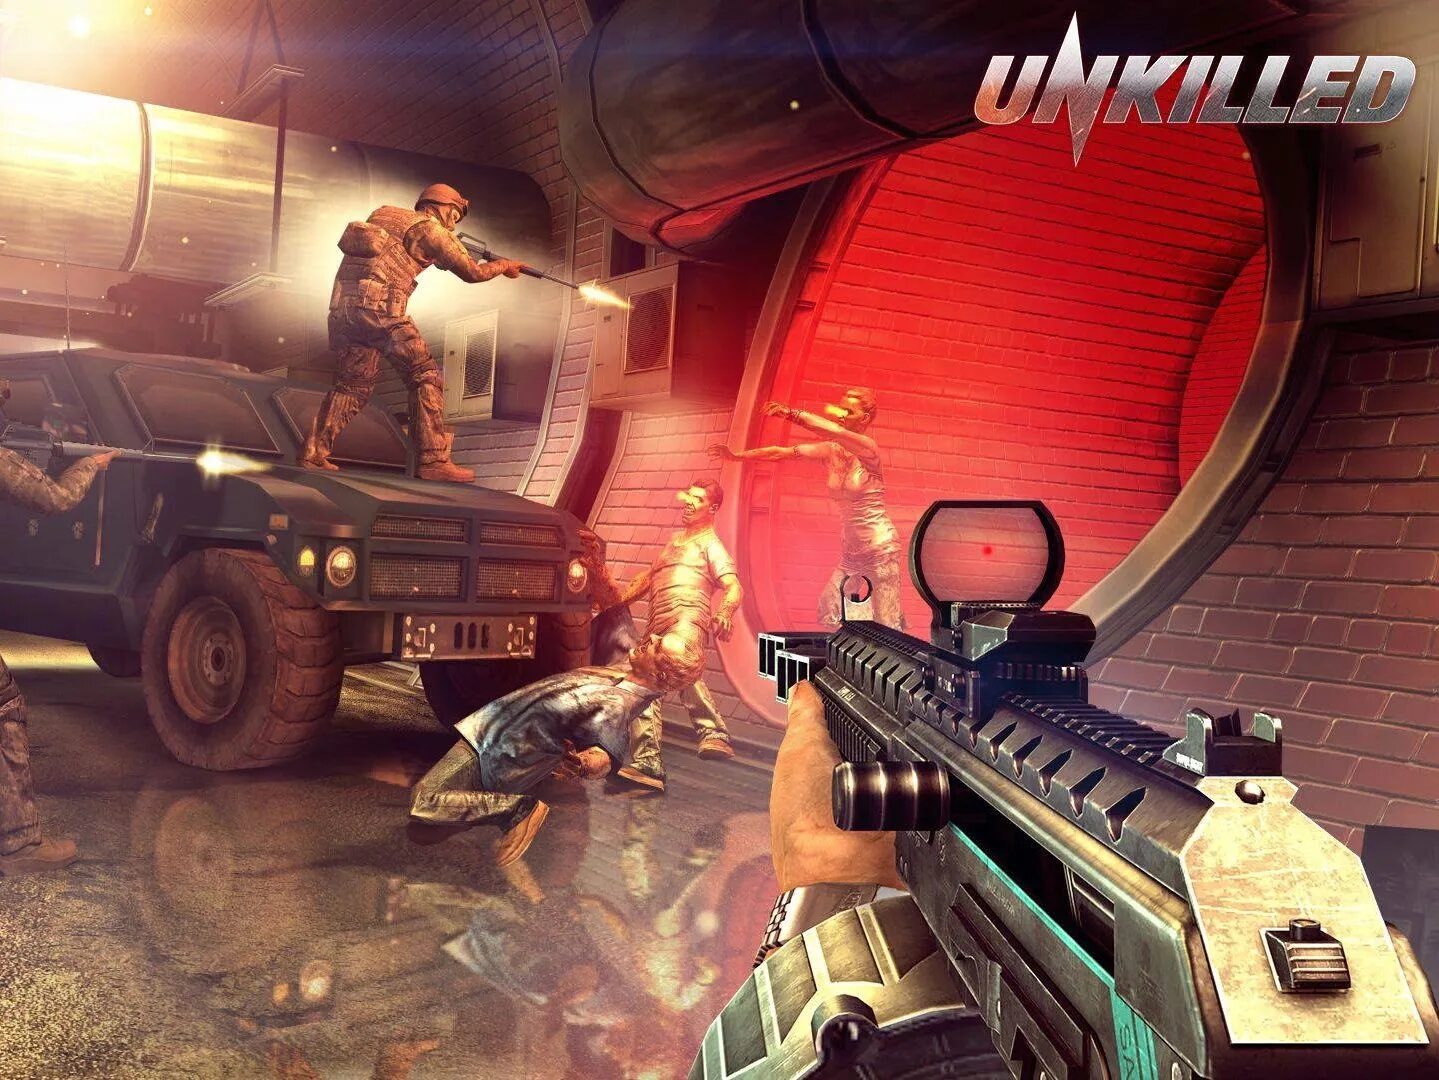 Unkilled. Игры Unkilled. Unkilled Zombie games. «Unkilled - Zombie fps shooting game» уууууууууууууууууууууууууууууууууу. Много денег много золота стрелялки